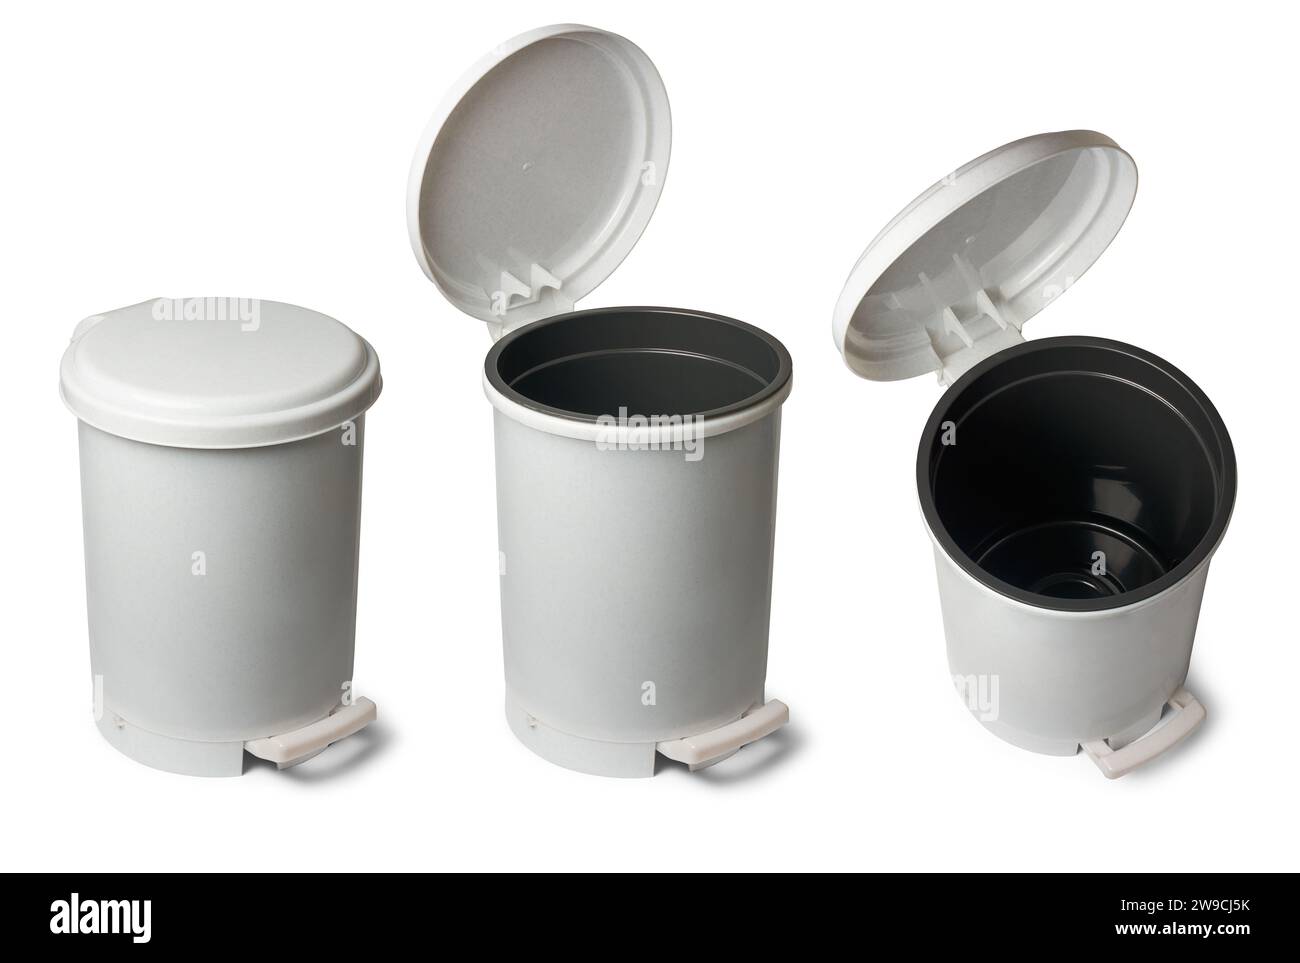 set of pedal bins or pedal trash cans, indoor waste disposal containers that have foot pedal mechanism for hands free operation, used in kitchens Stock Photo